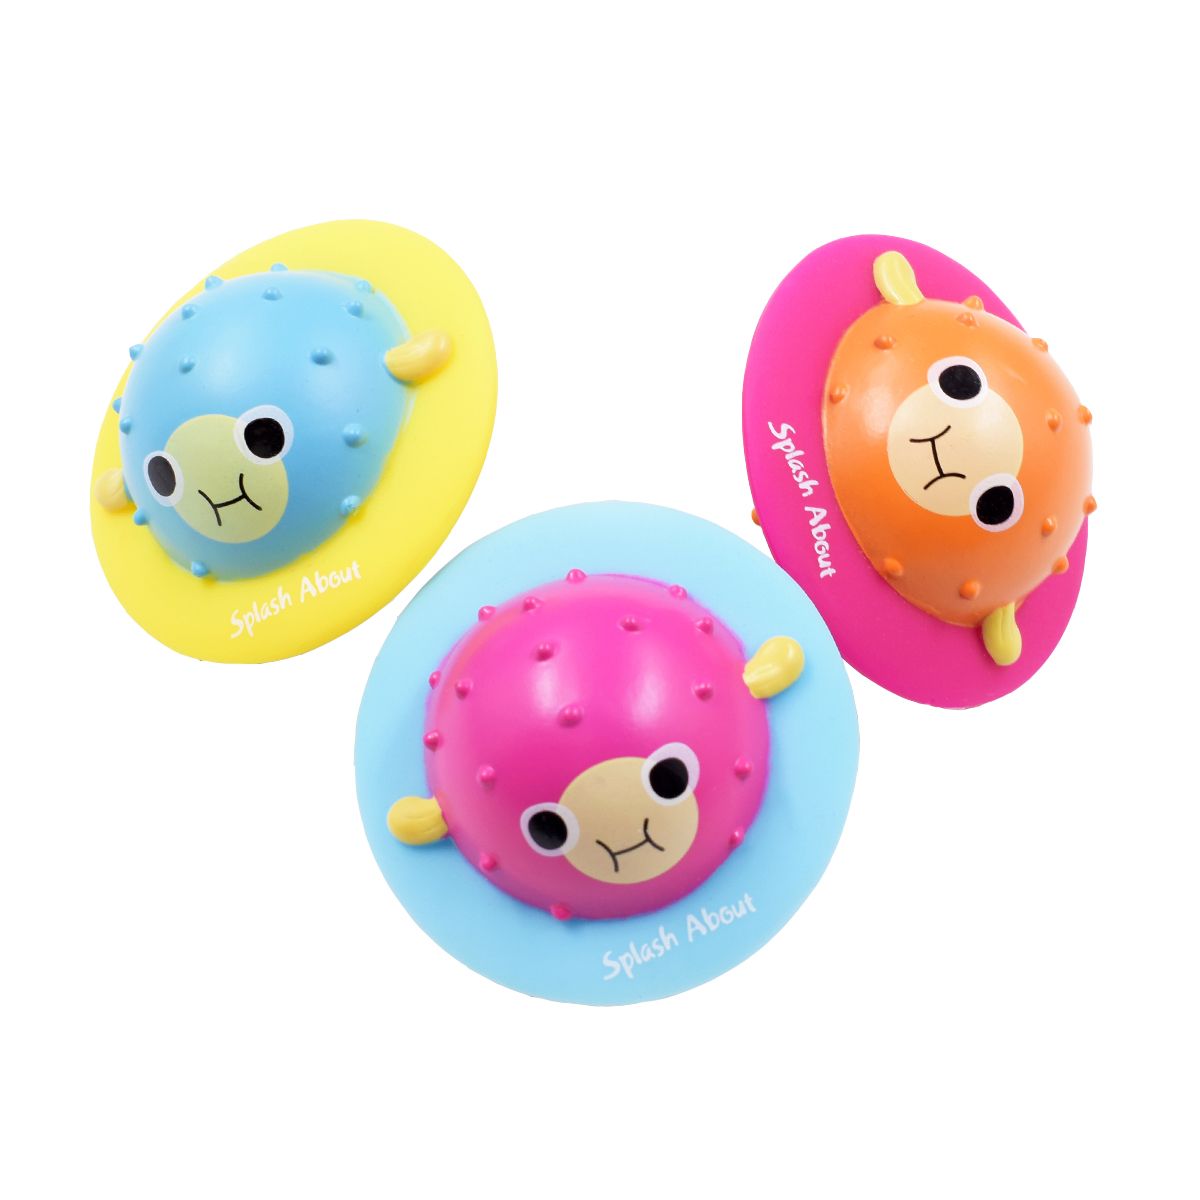 Pufferfish Flips & Float Toys (Pack of 3)